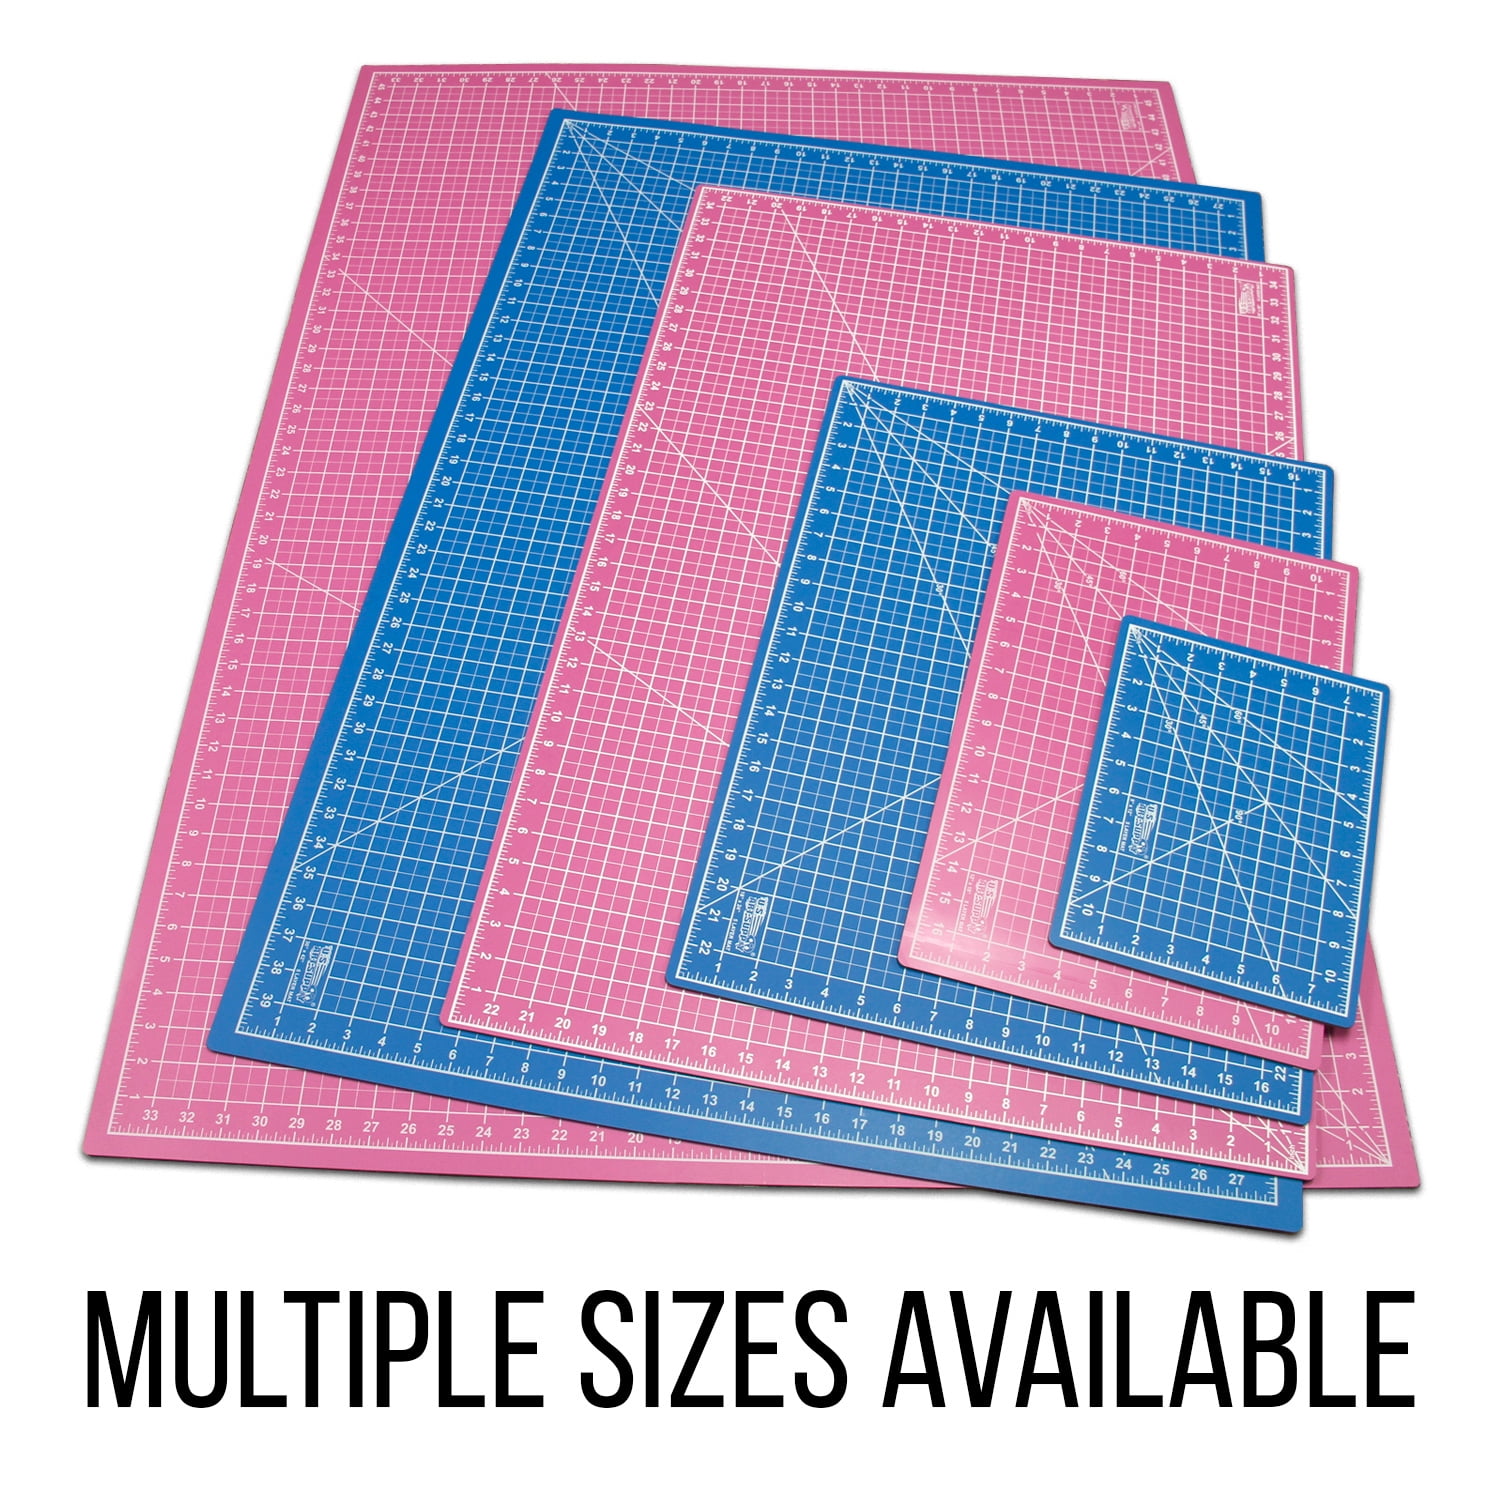  Pink Silicone Mat for Crafts Rabbit 15.7 x 19.7